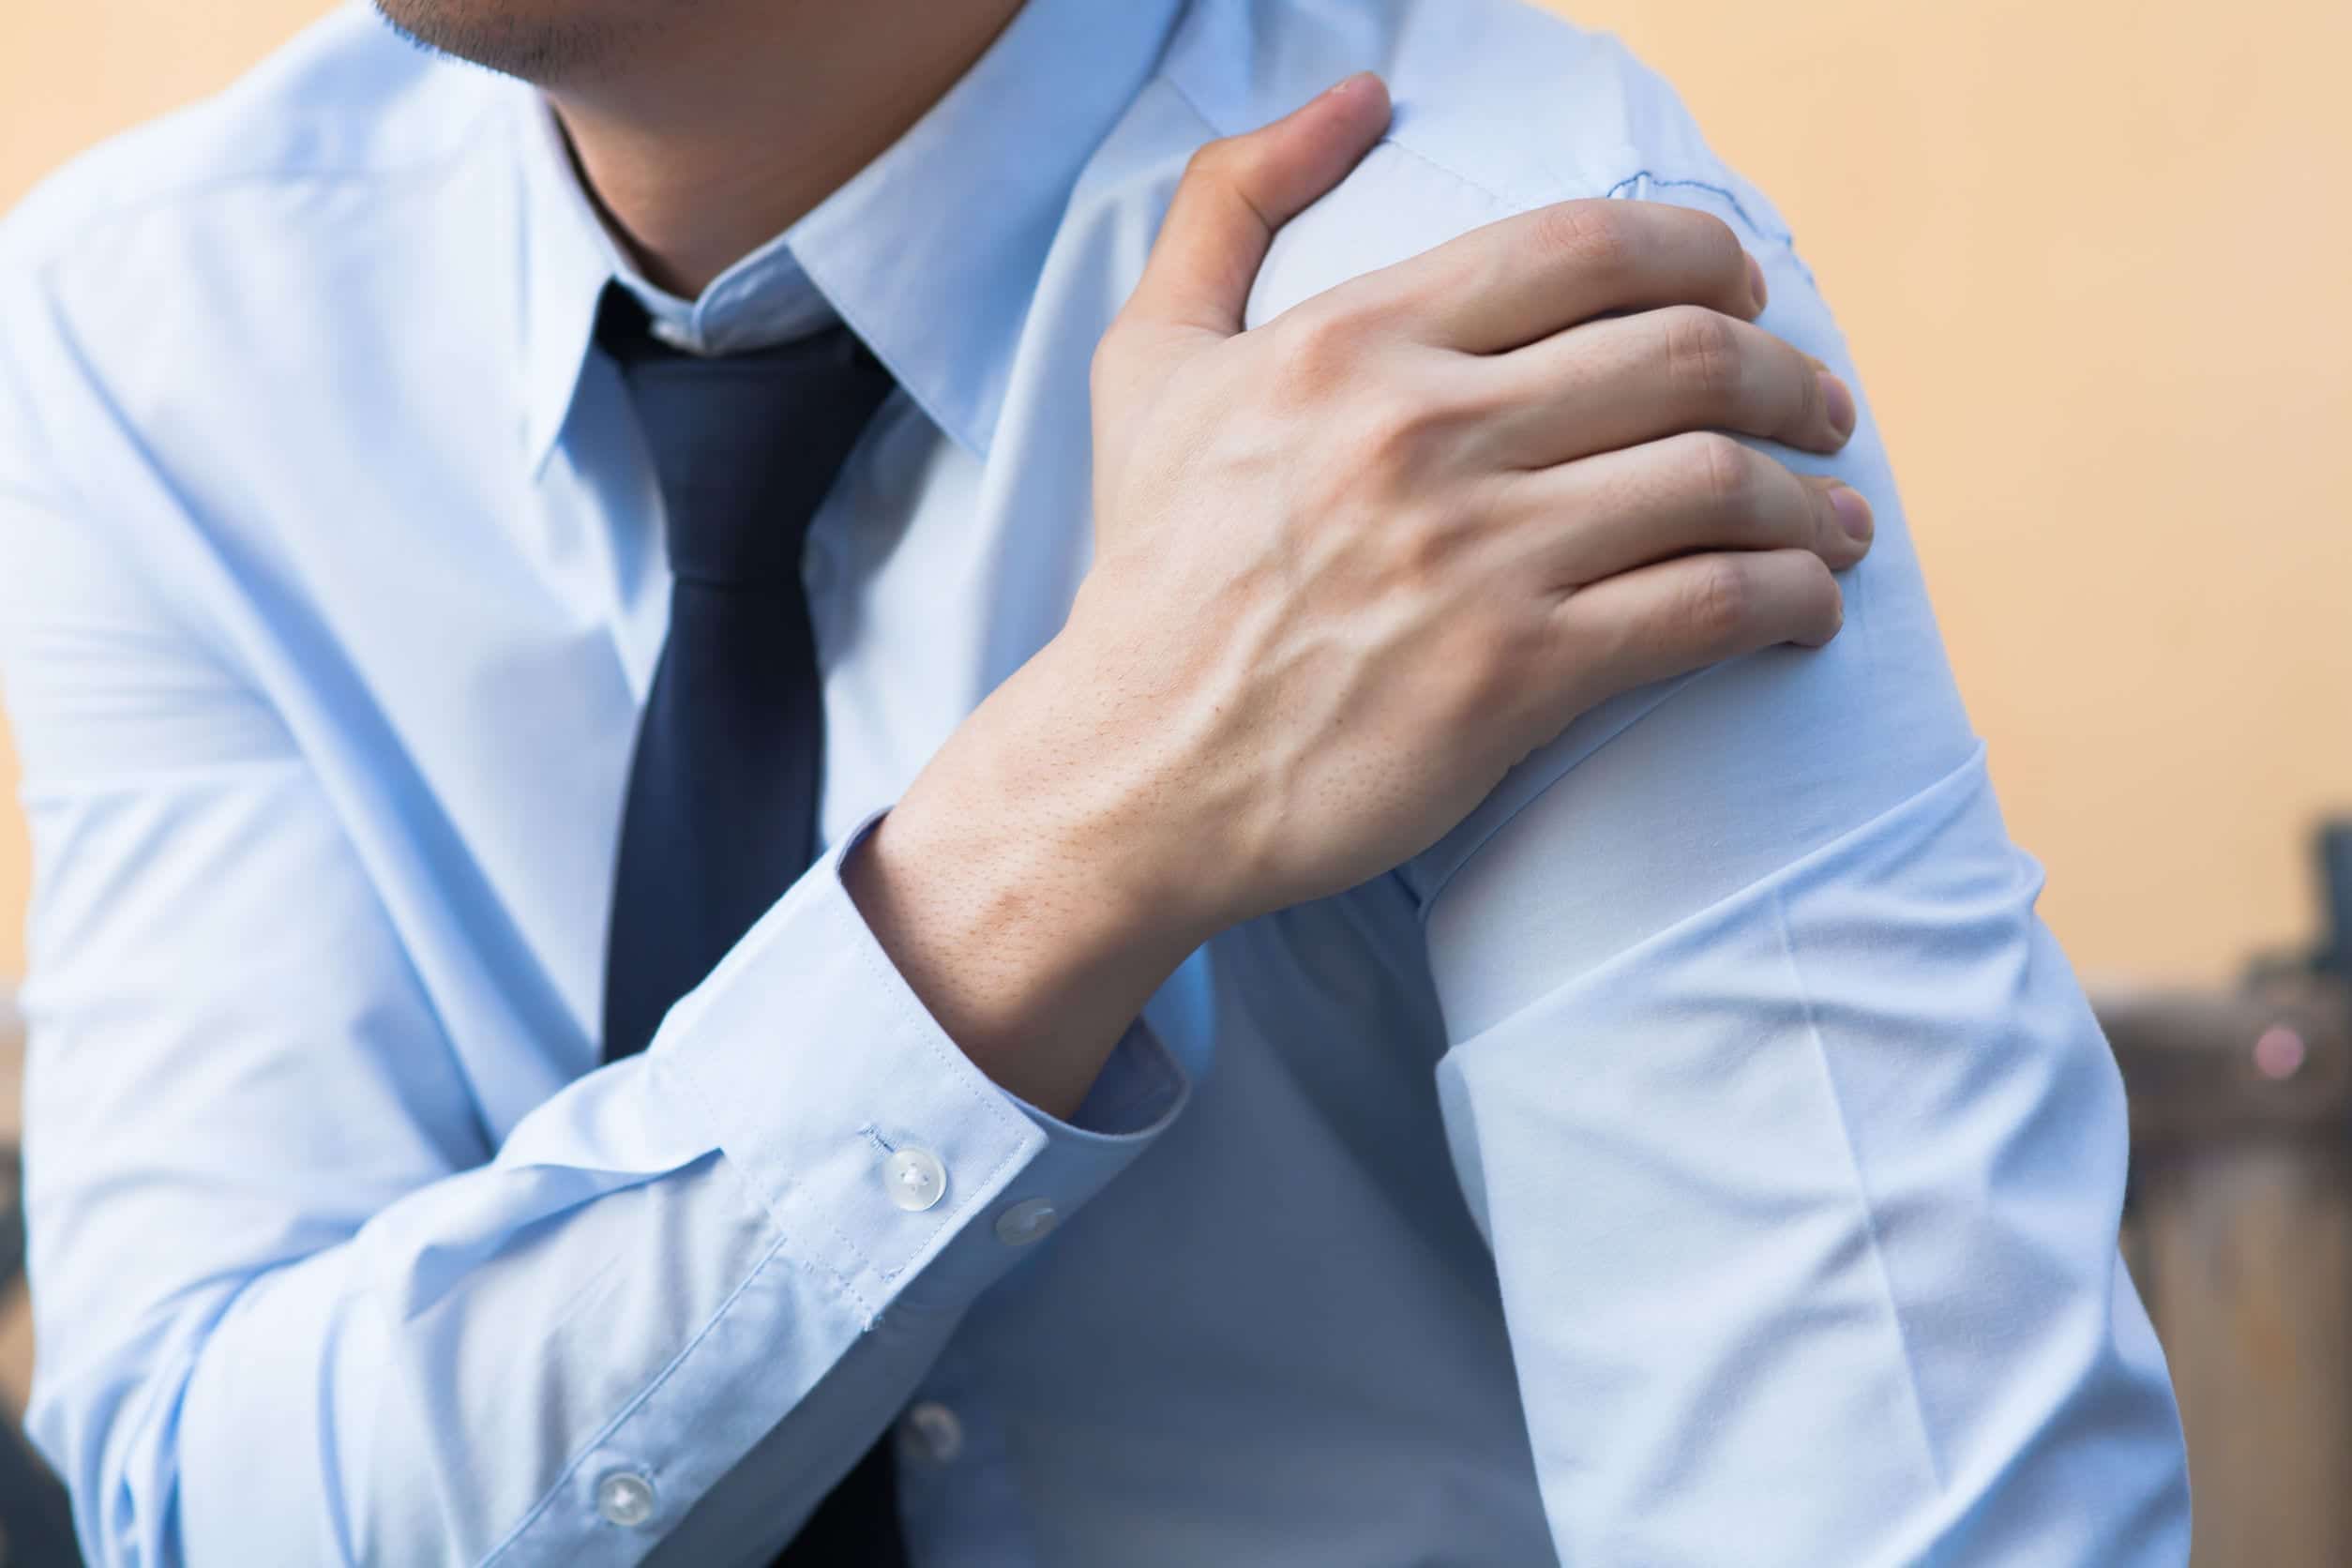 , Shoulder Hurting? Here Are Some Likely Reasons Why